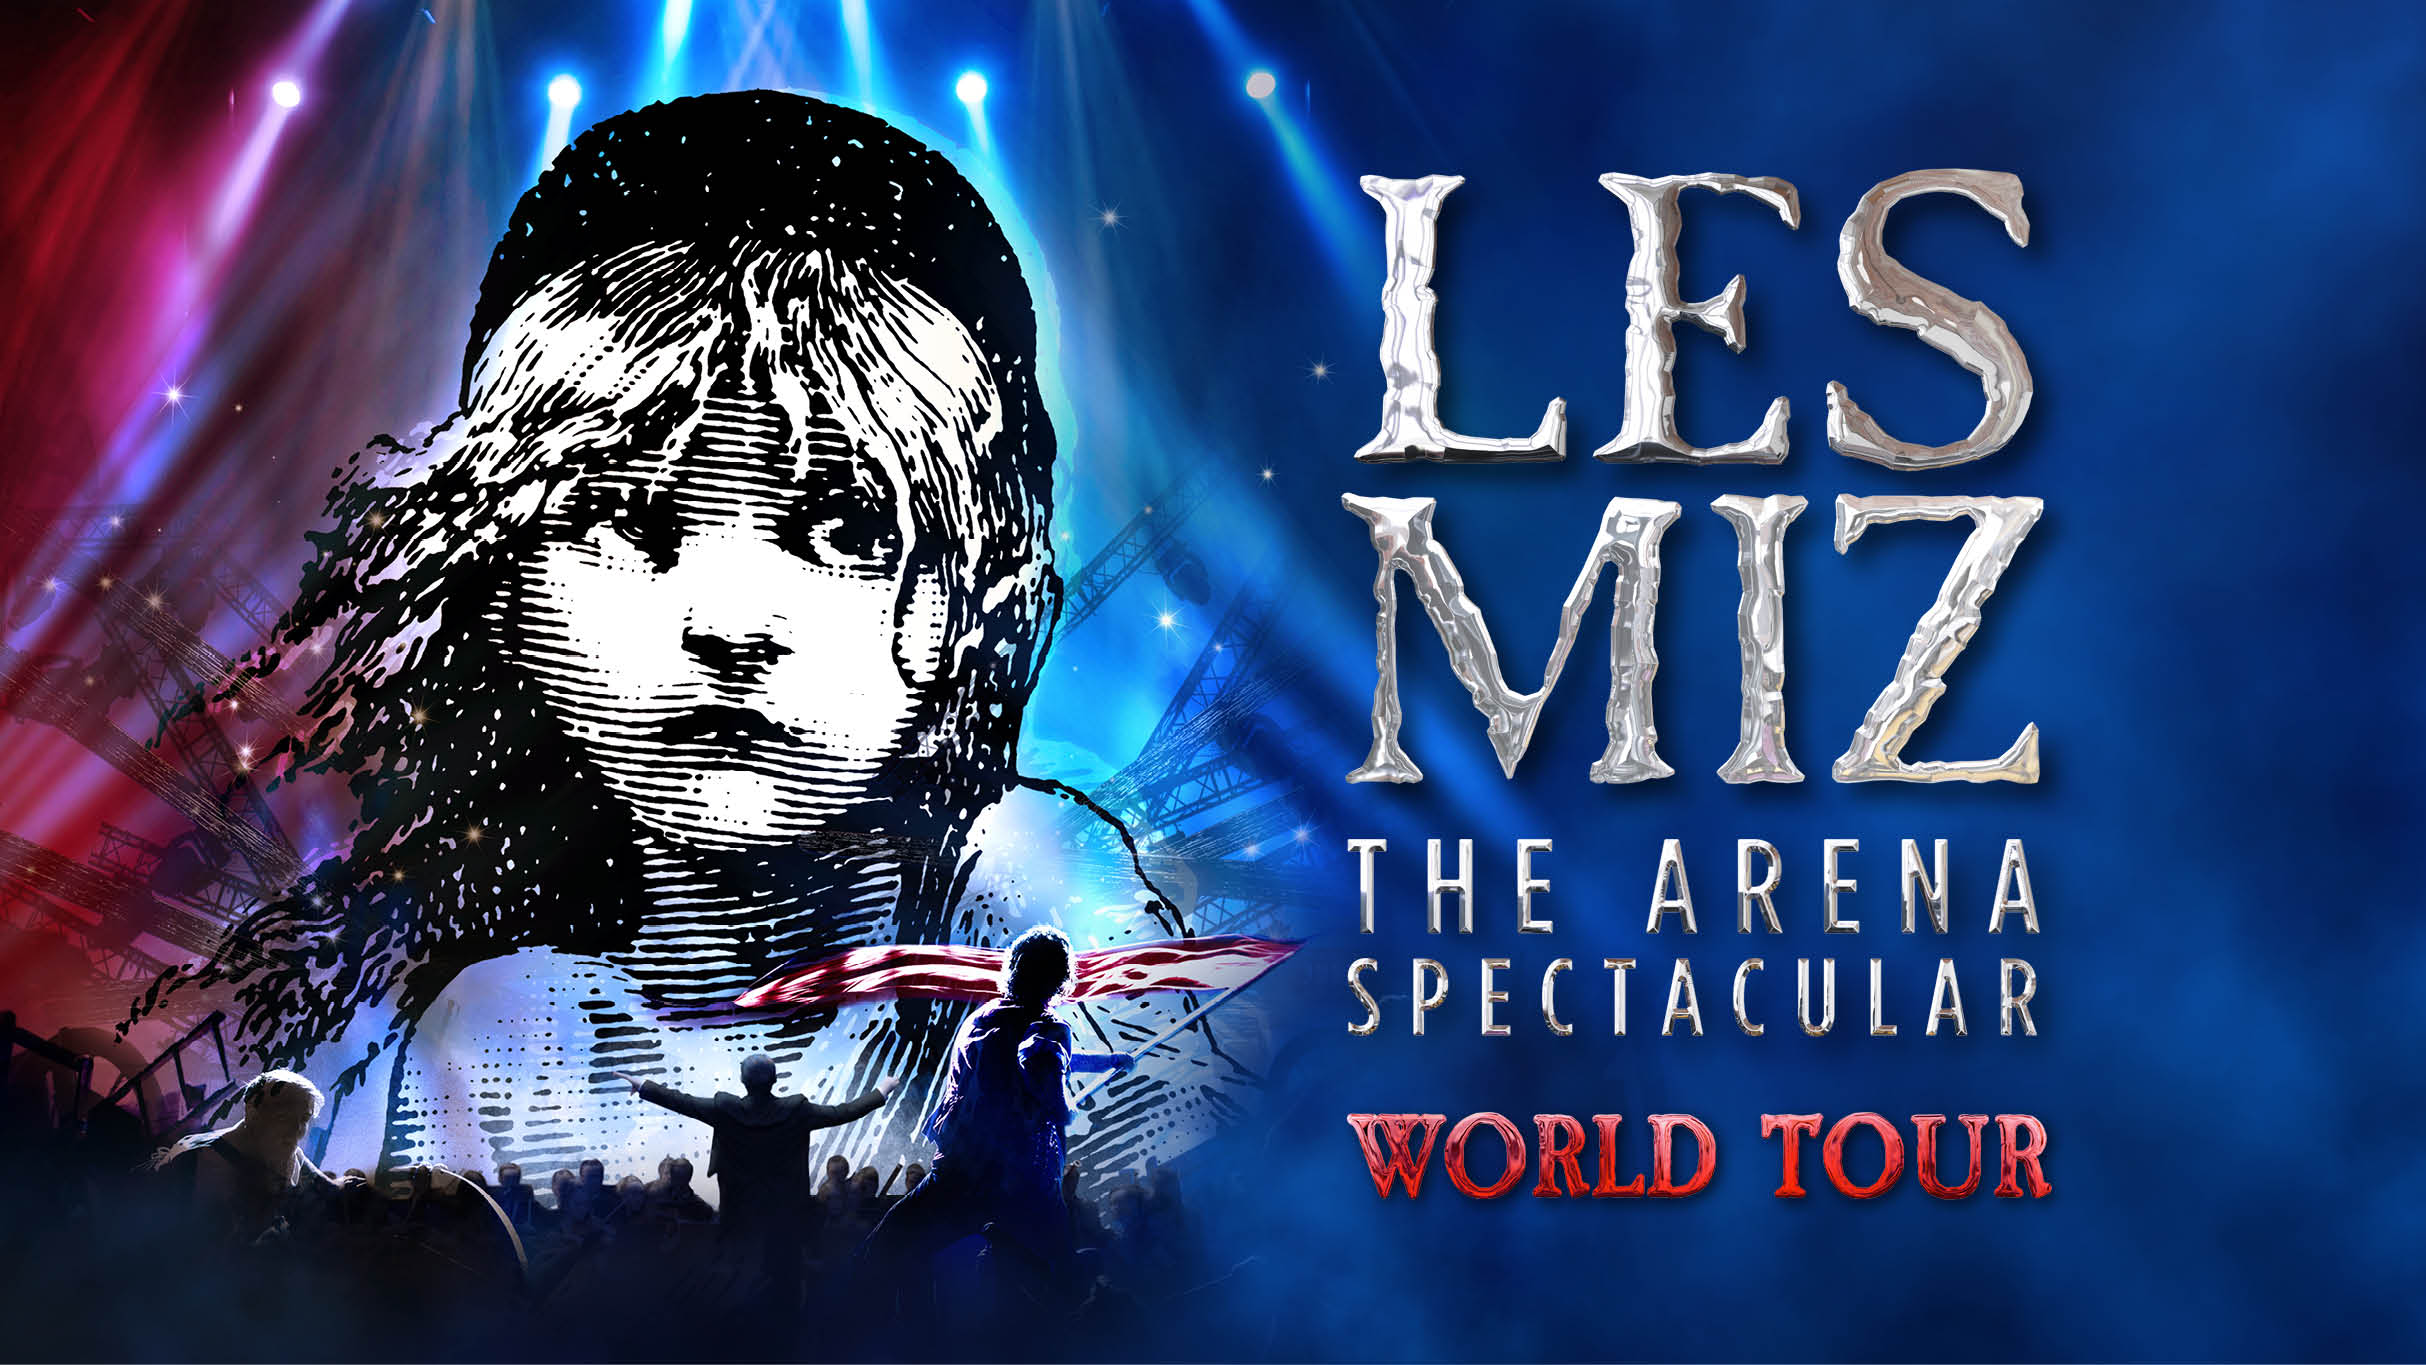 Image name Les Miserables The Arena Spectacular at Utilita Arena Sheffield Sheffield the 10 image from the post Les Miserables: The Arena Spectacular at Utilita Arena Sheffield, Sheffield in Yorkshire.com.